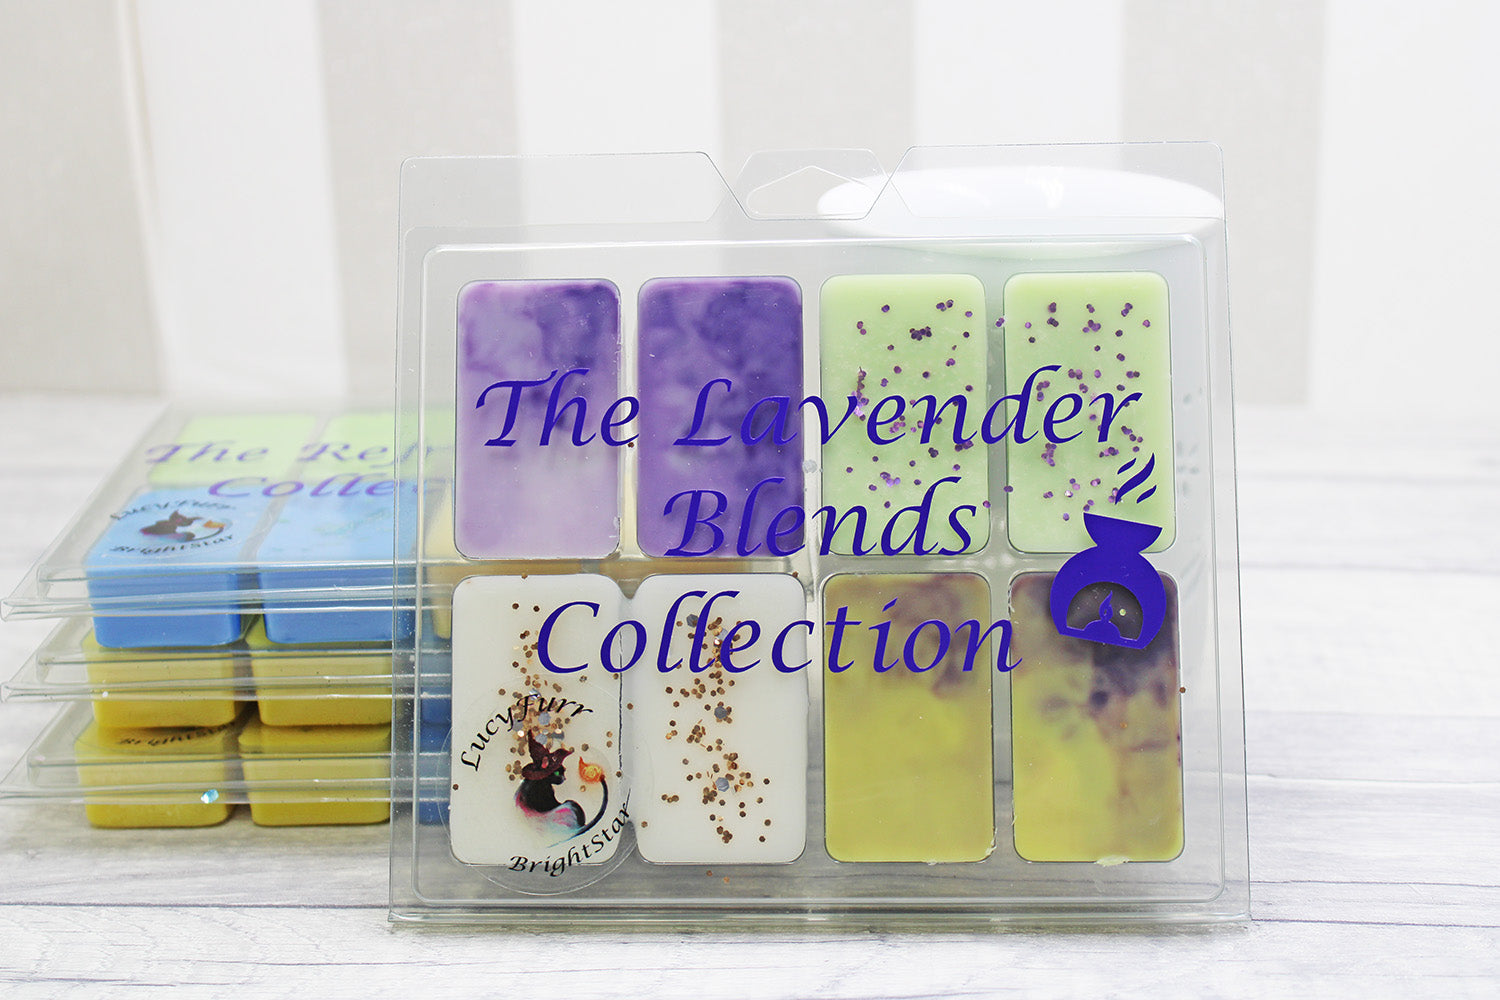 Lavender Blends Collection Soy Wax Melt Clamshell